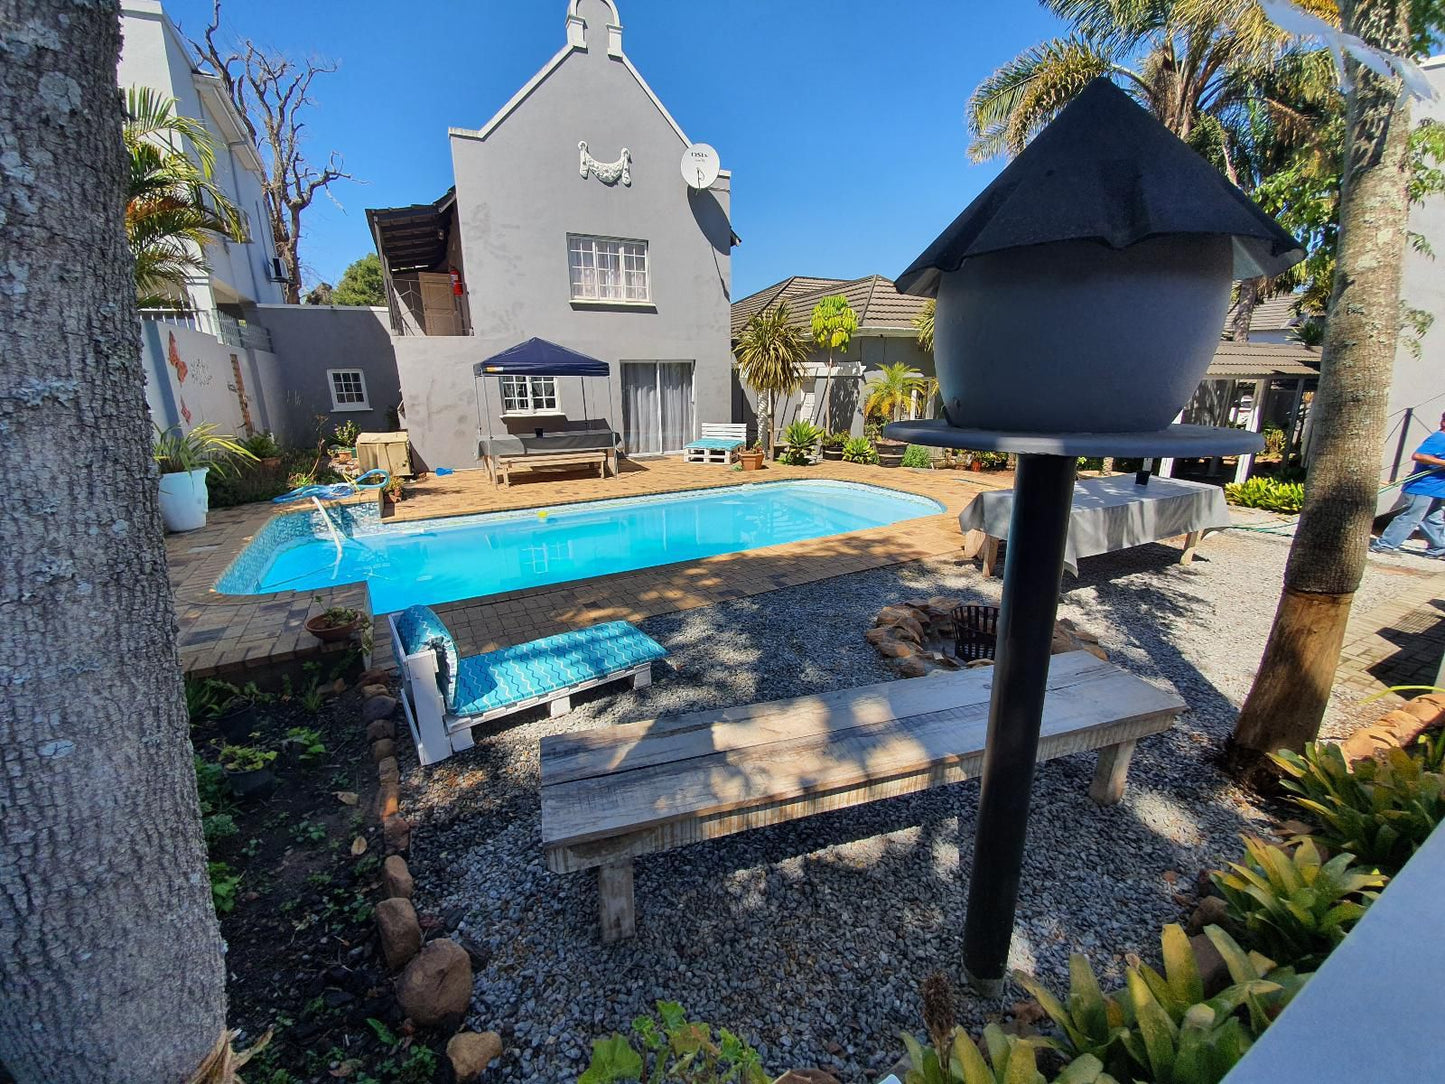 George Lodge International Camphers Drift George Western Cape South Africa House, Building, Architecture, Palm Tree, Plant, Nature, Wood, Garden, Swimming Pool